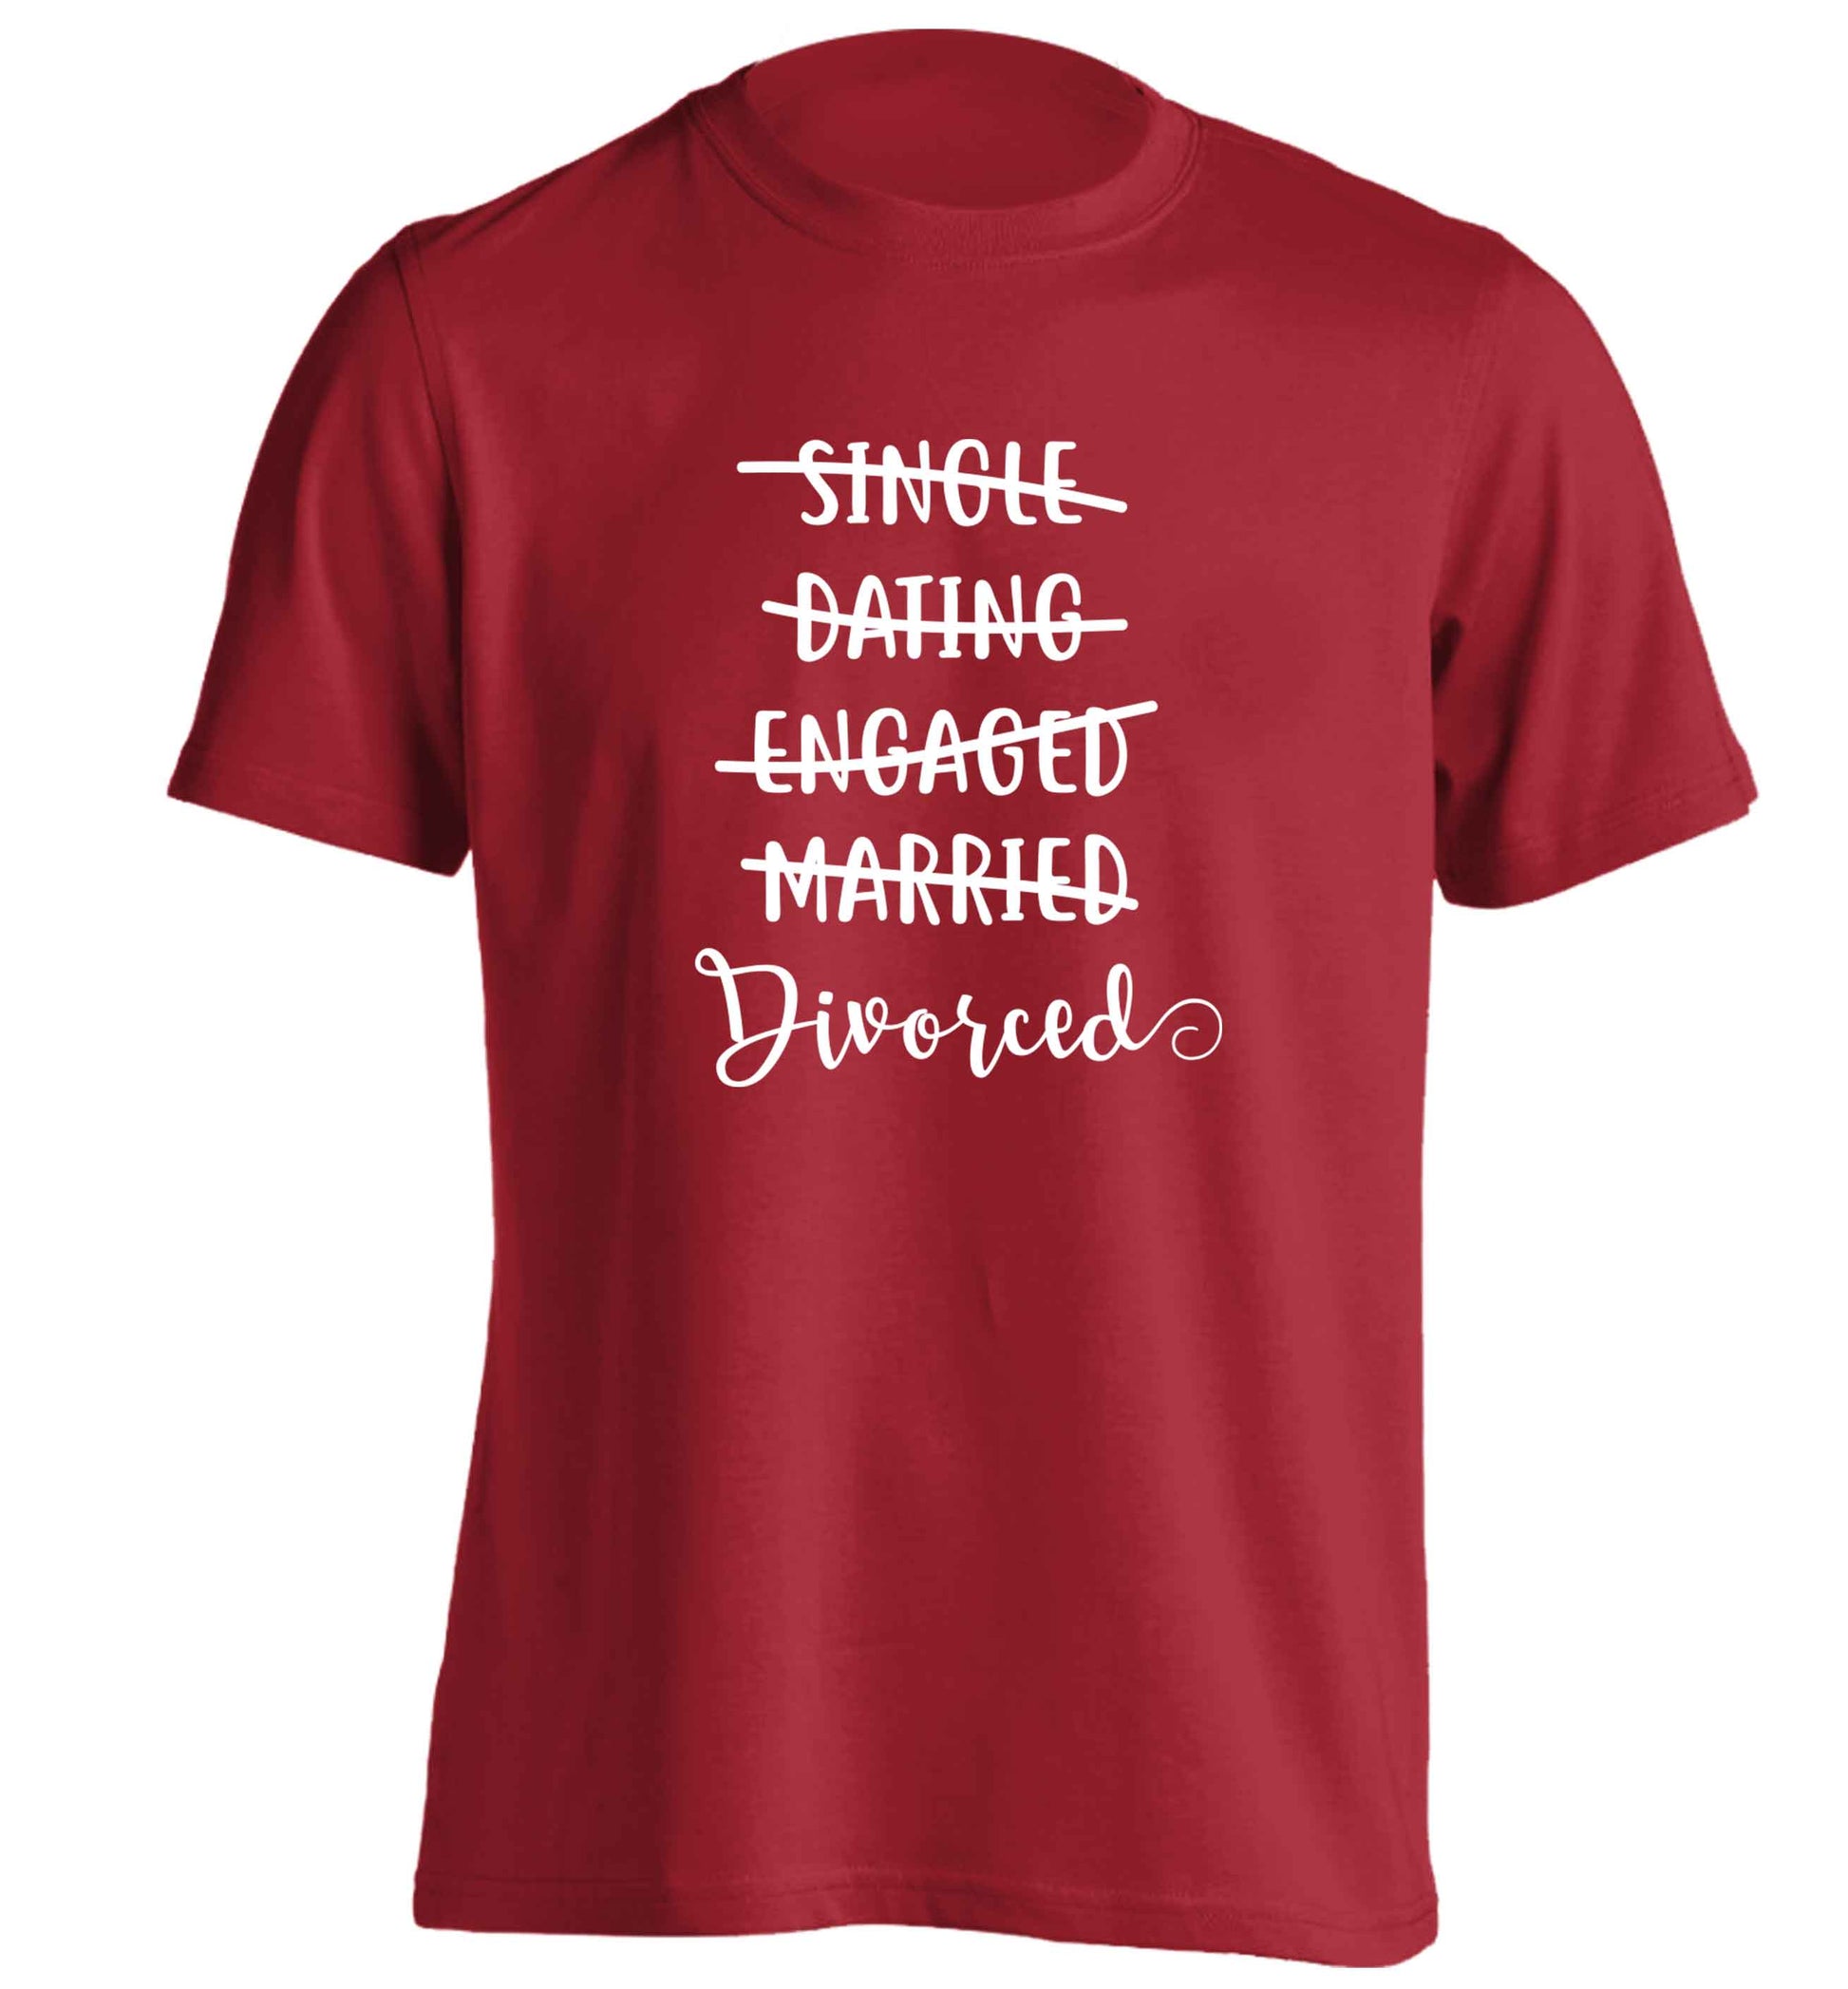 Single, dating, engaged, divorced adults unisex red Tshirt 2XL